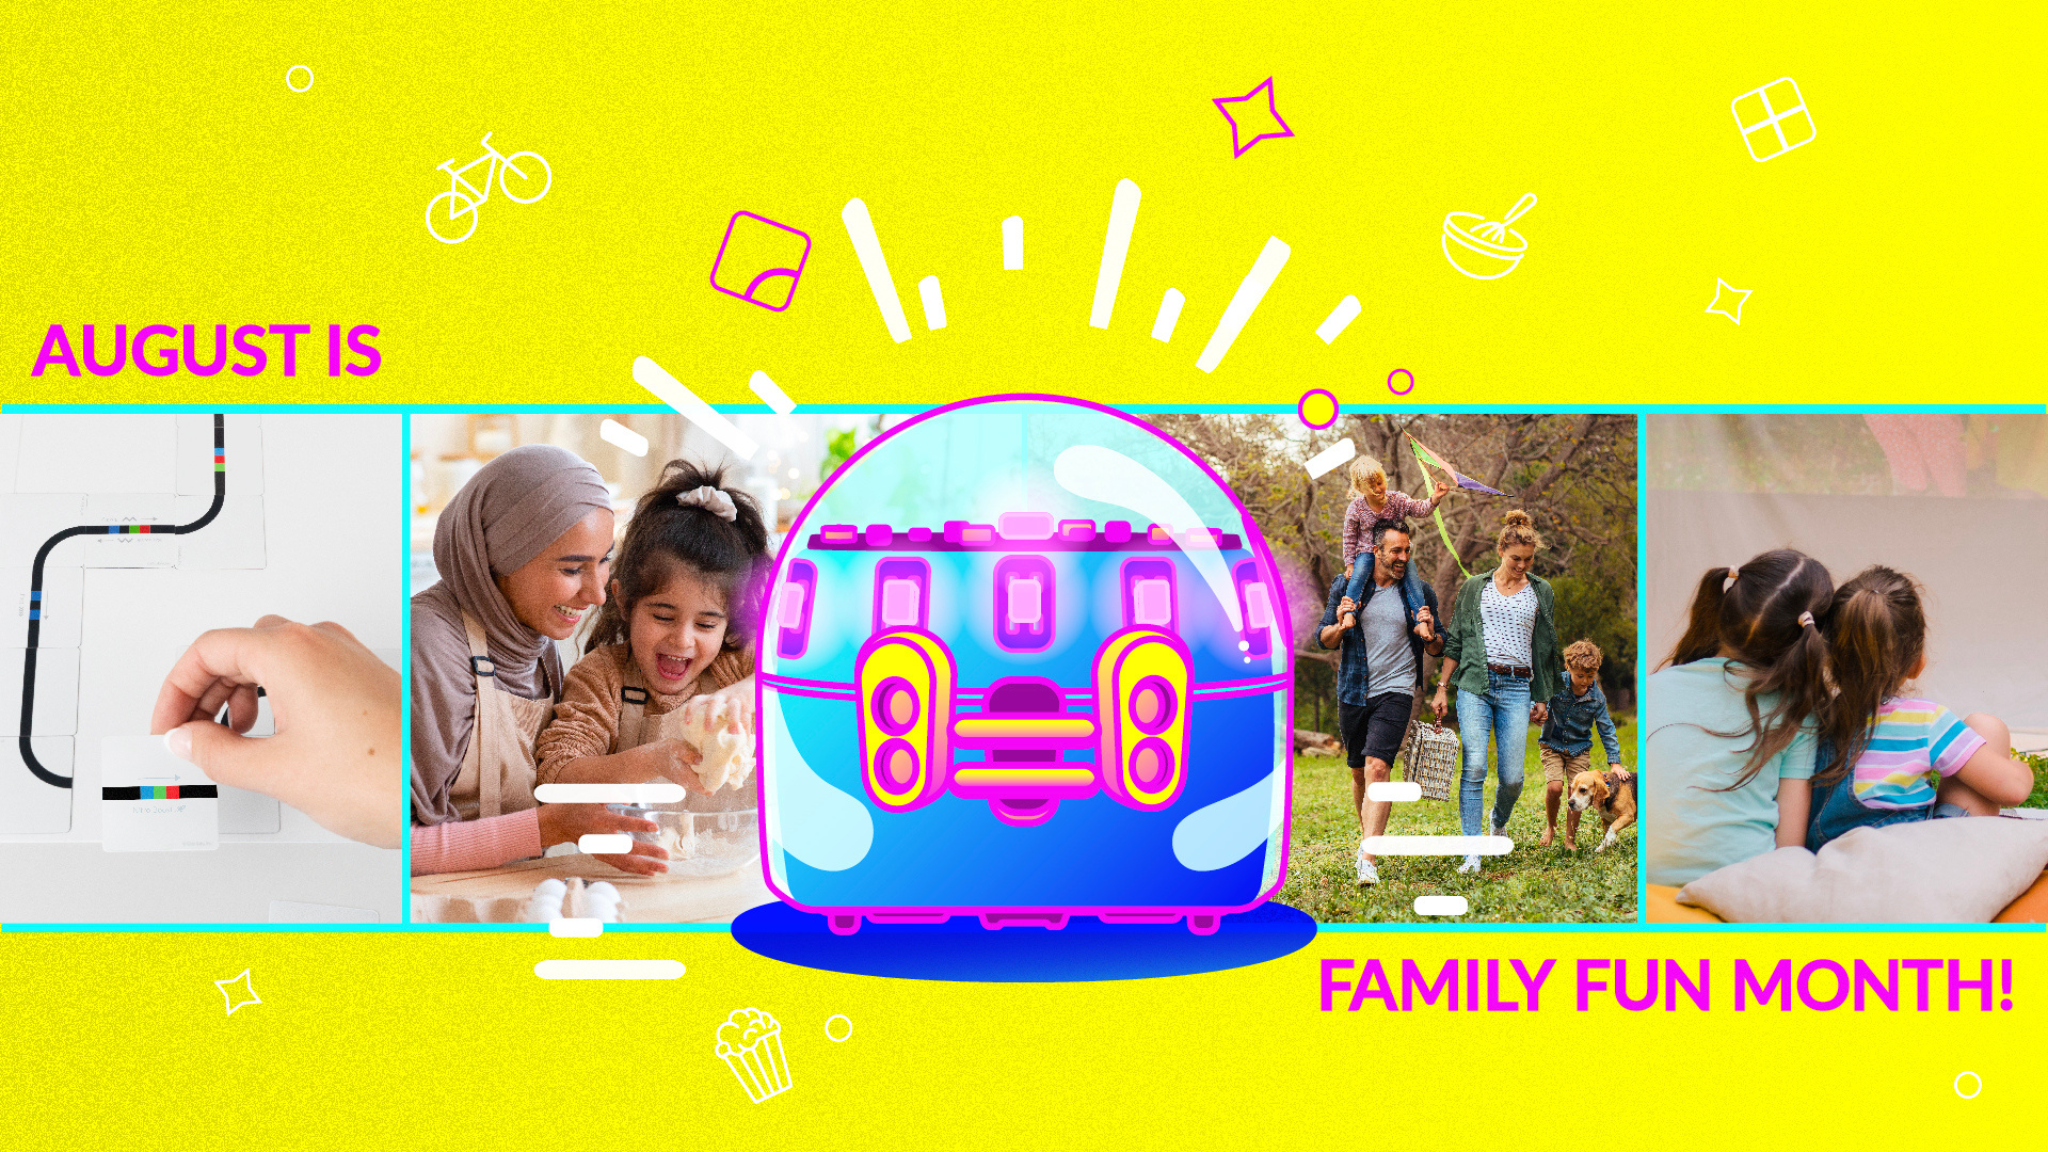 August is Family Fun Month! Celebrate with these five memorable family activities.